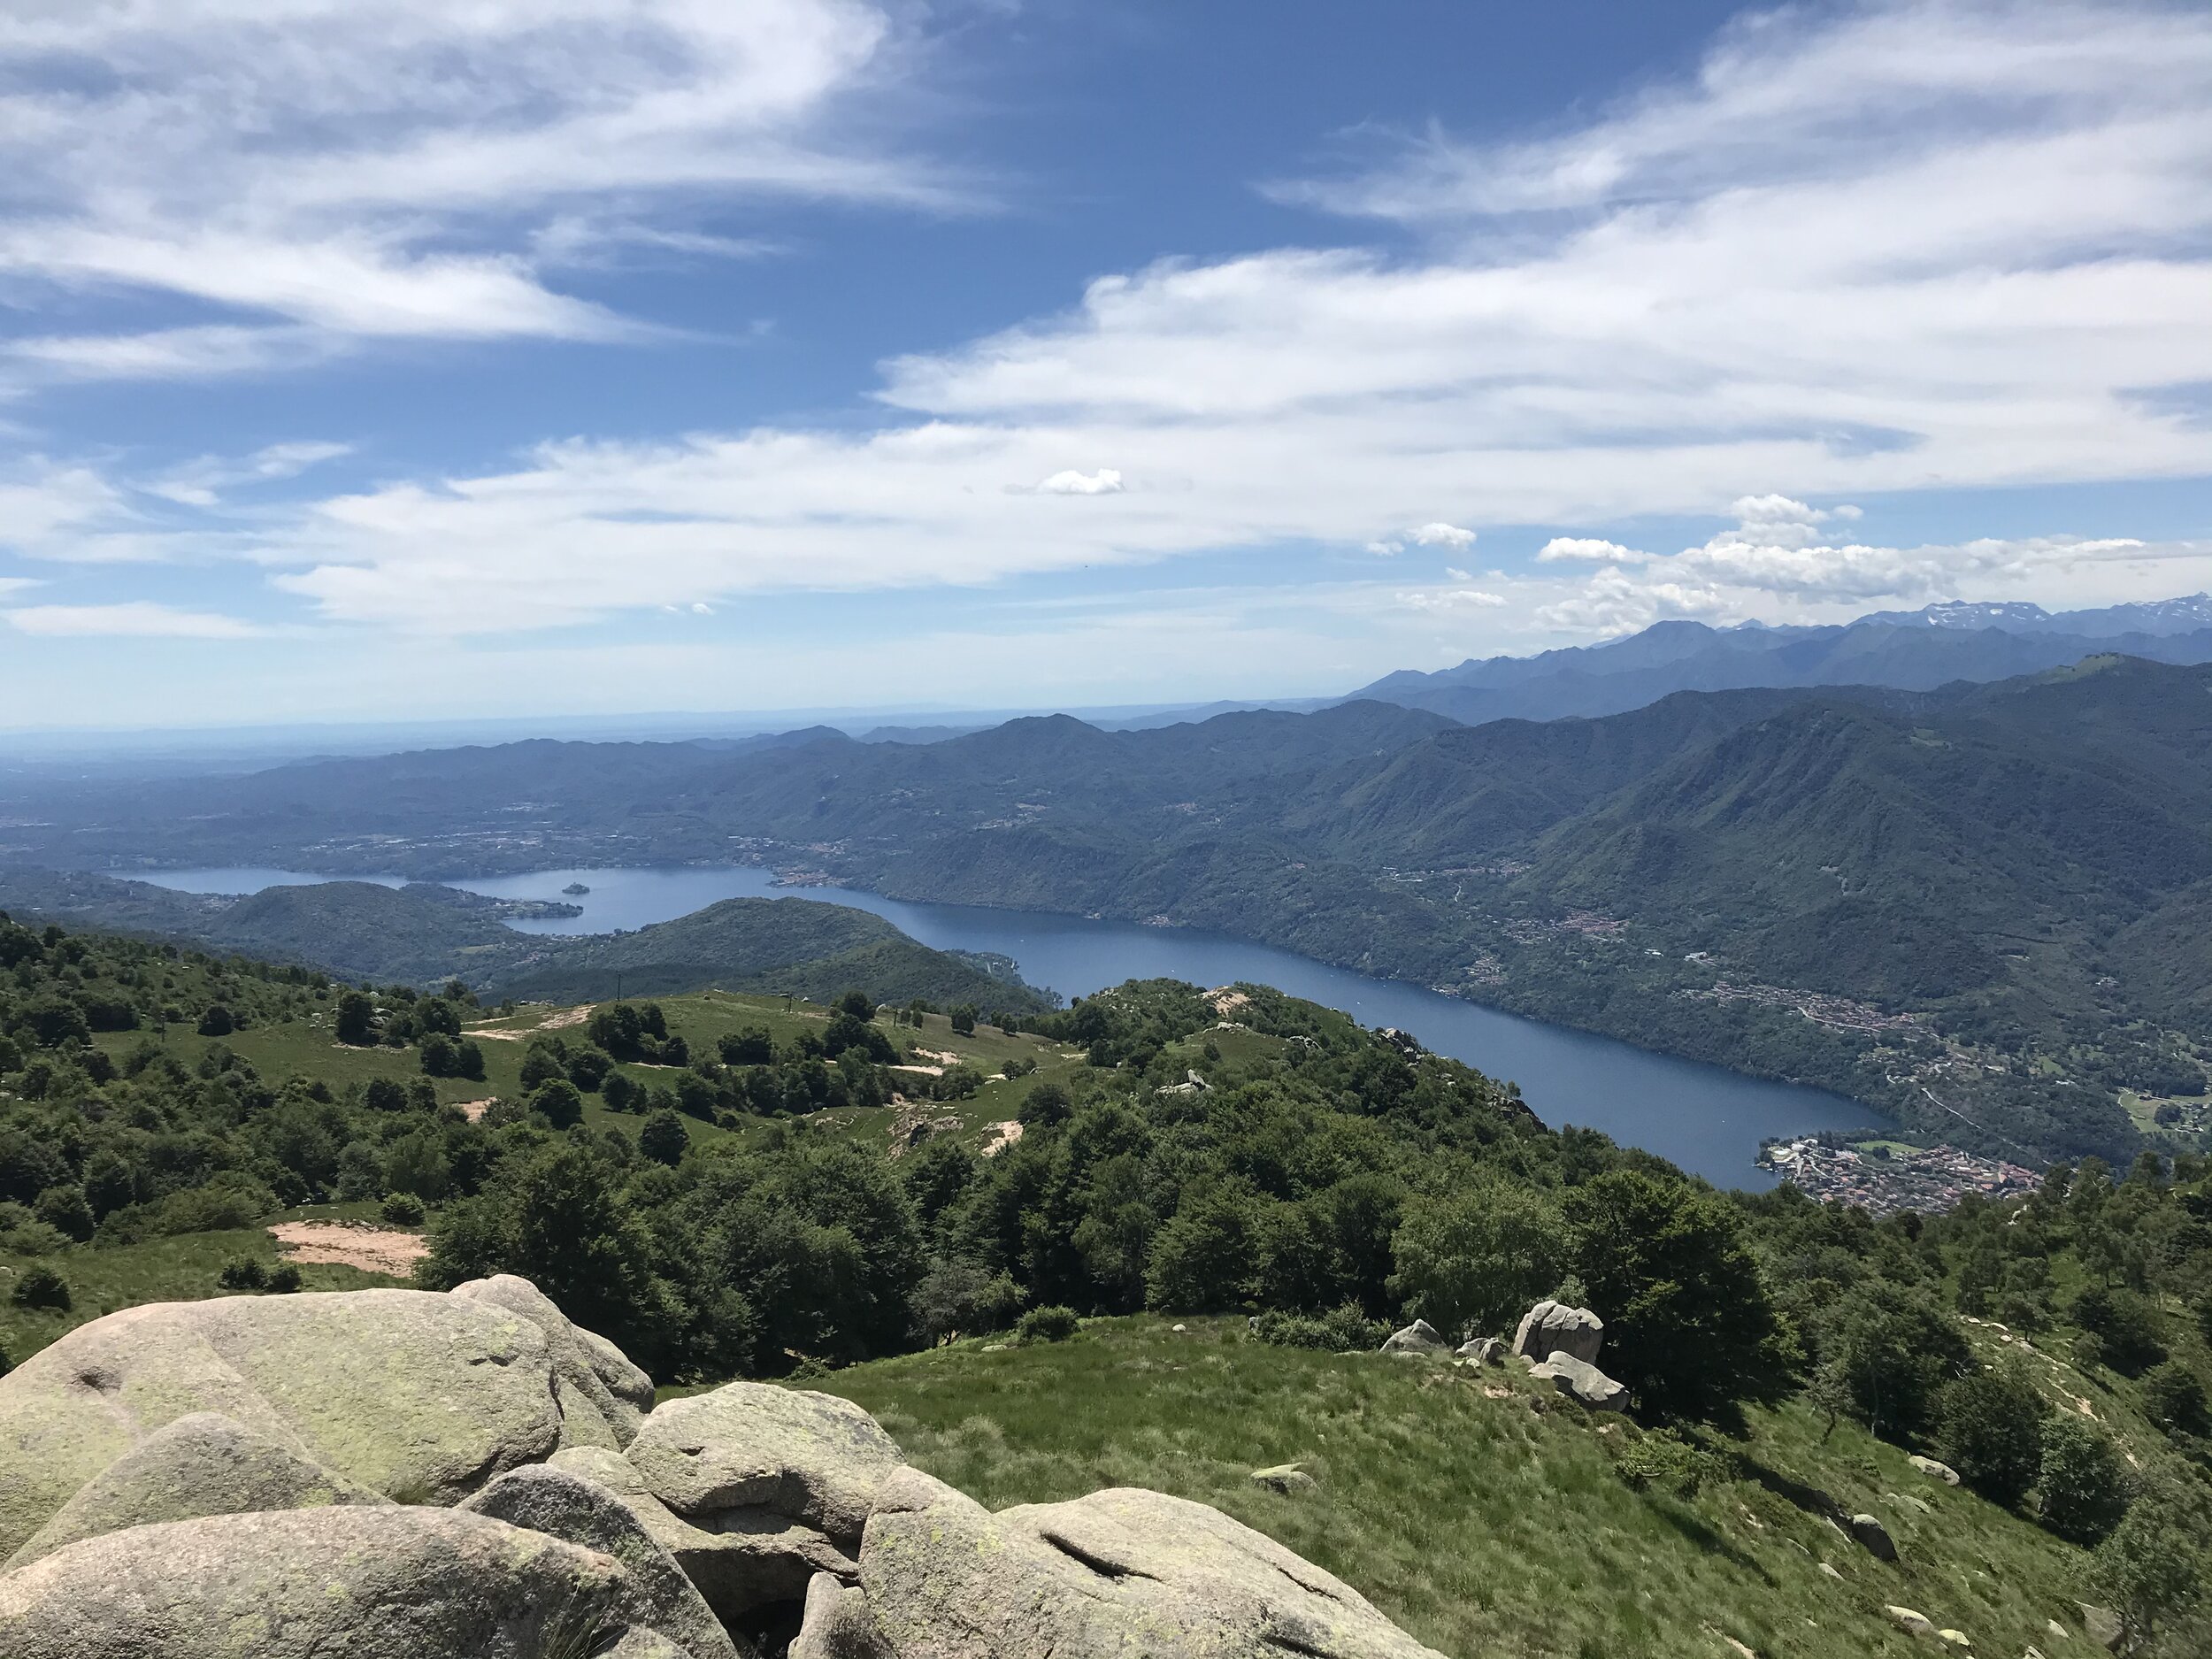 MOTTARONE, Piedmont, Italy. June, 2020. PICTURED: Lago d’Orta reveals its slender nature to hikers upon the summits of Mottarone, 24 kilometers by car above the lakes of Maggiore and Orta.